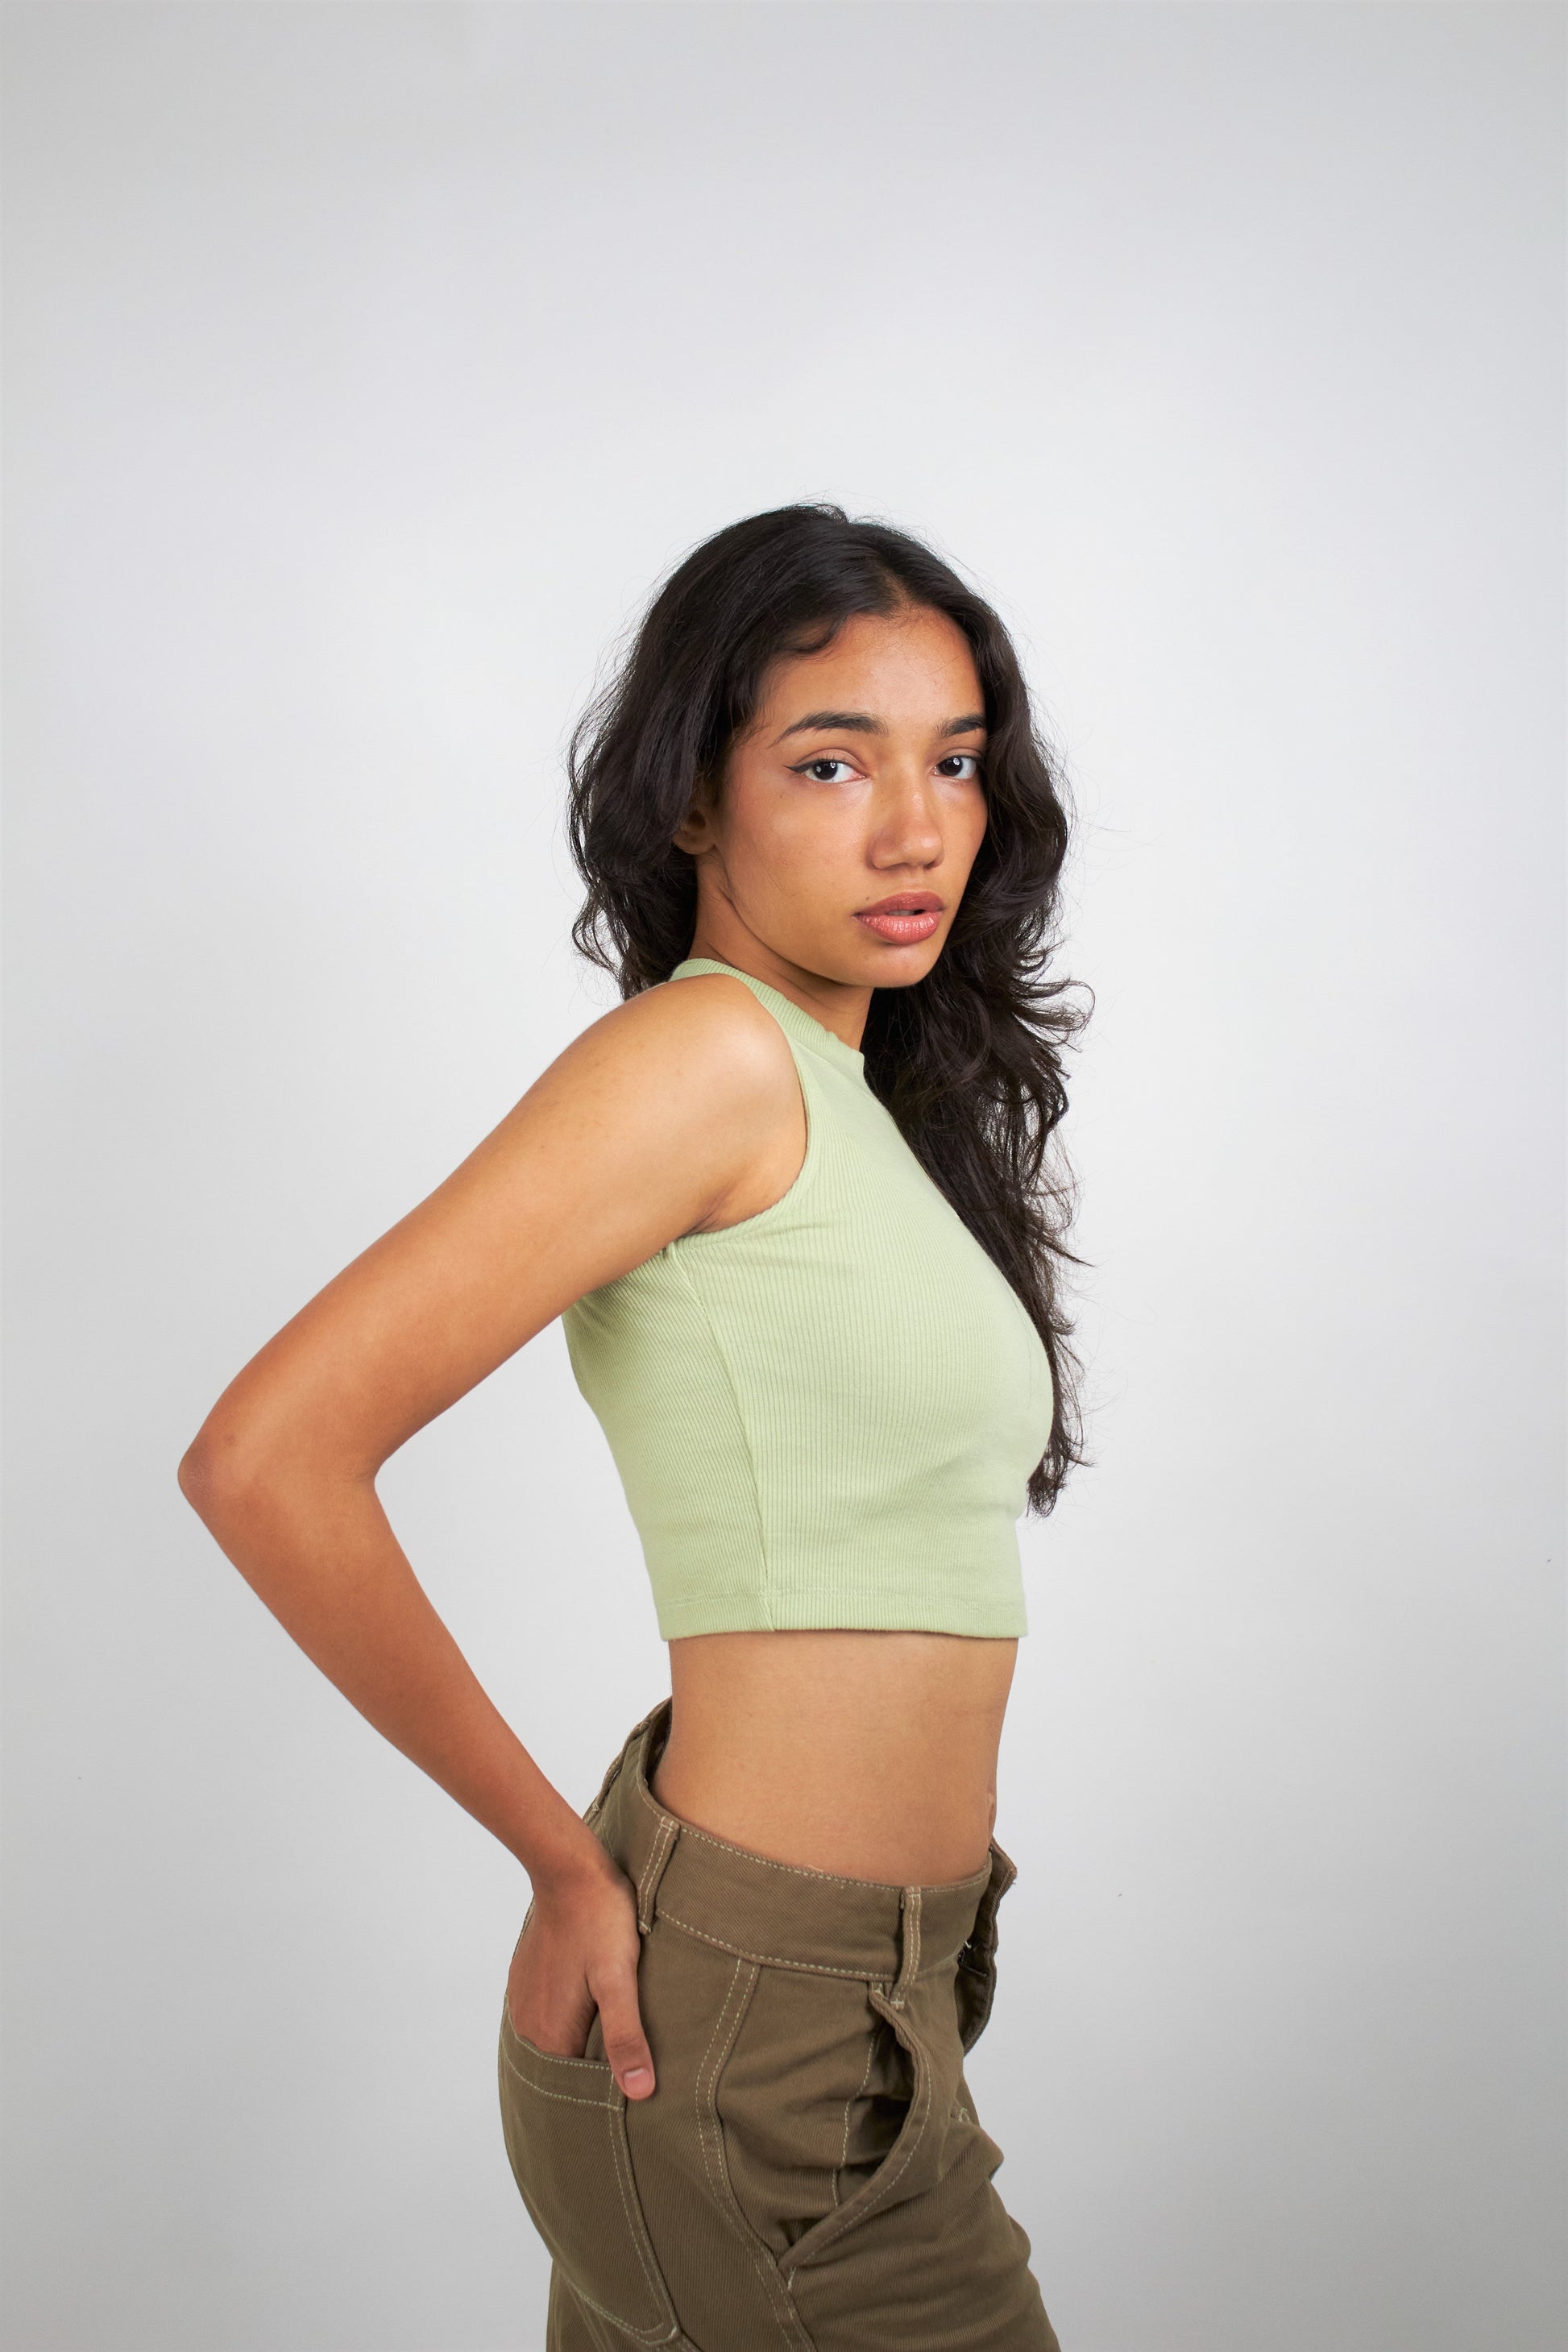 OFF Top Sage green (tank top) by Ripoff